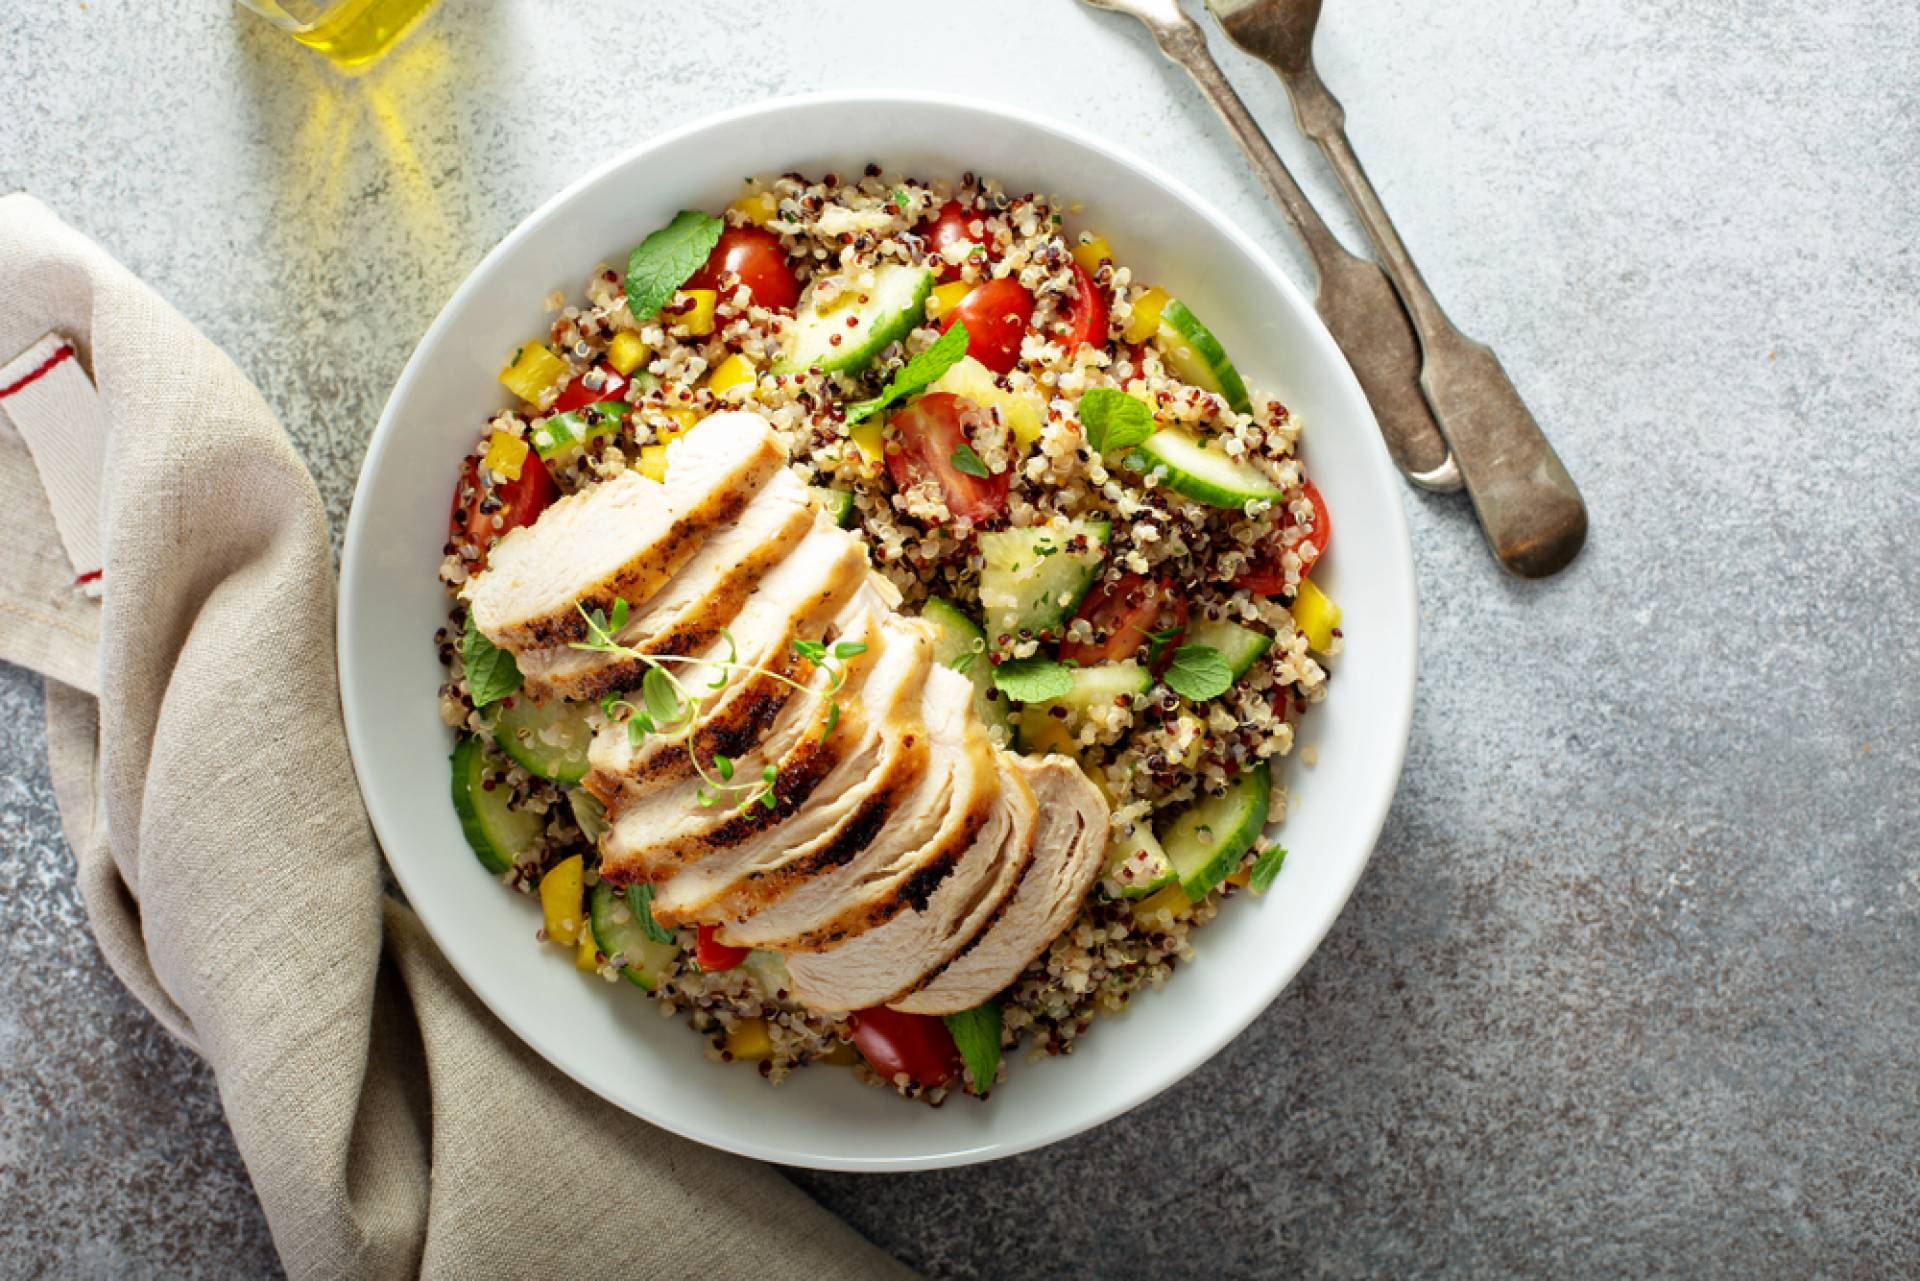 Grilled Chicken with Tabbouleh Salad